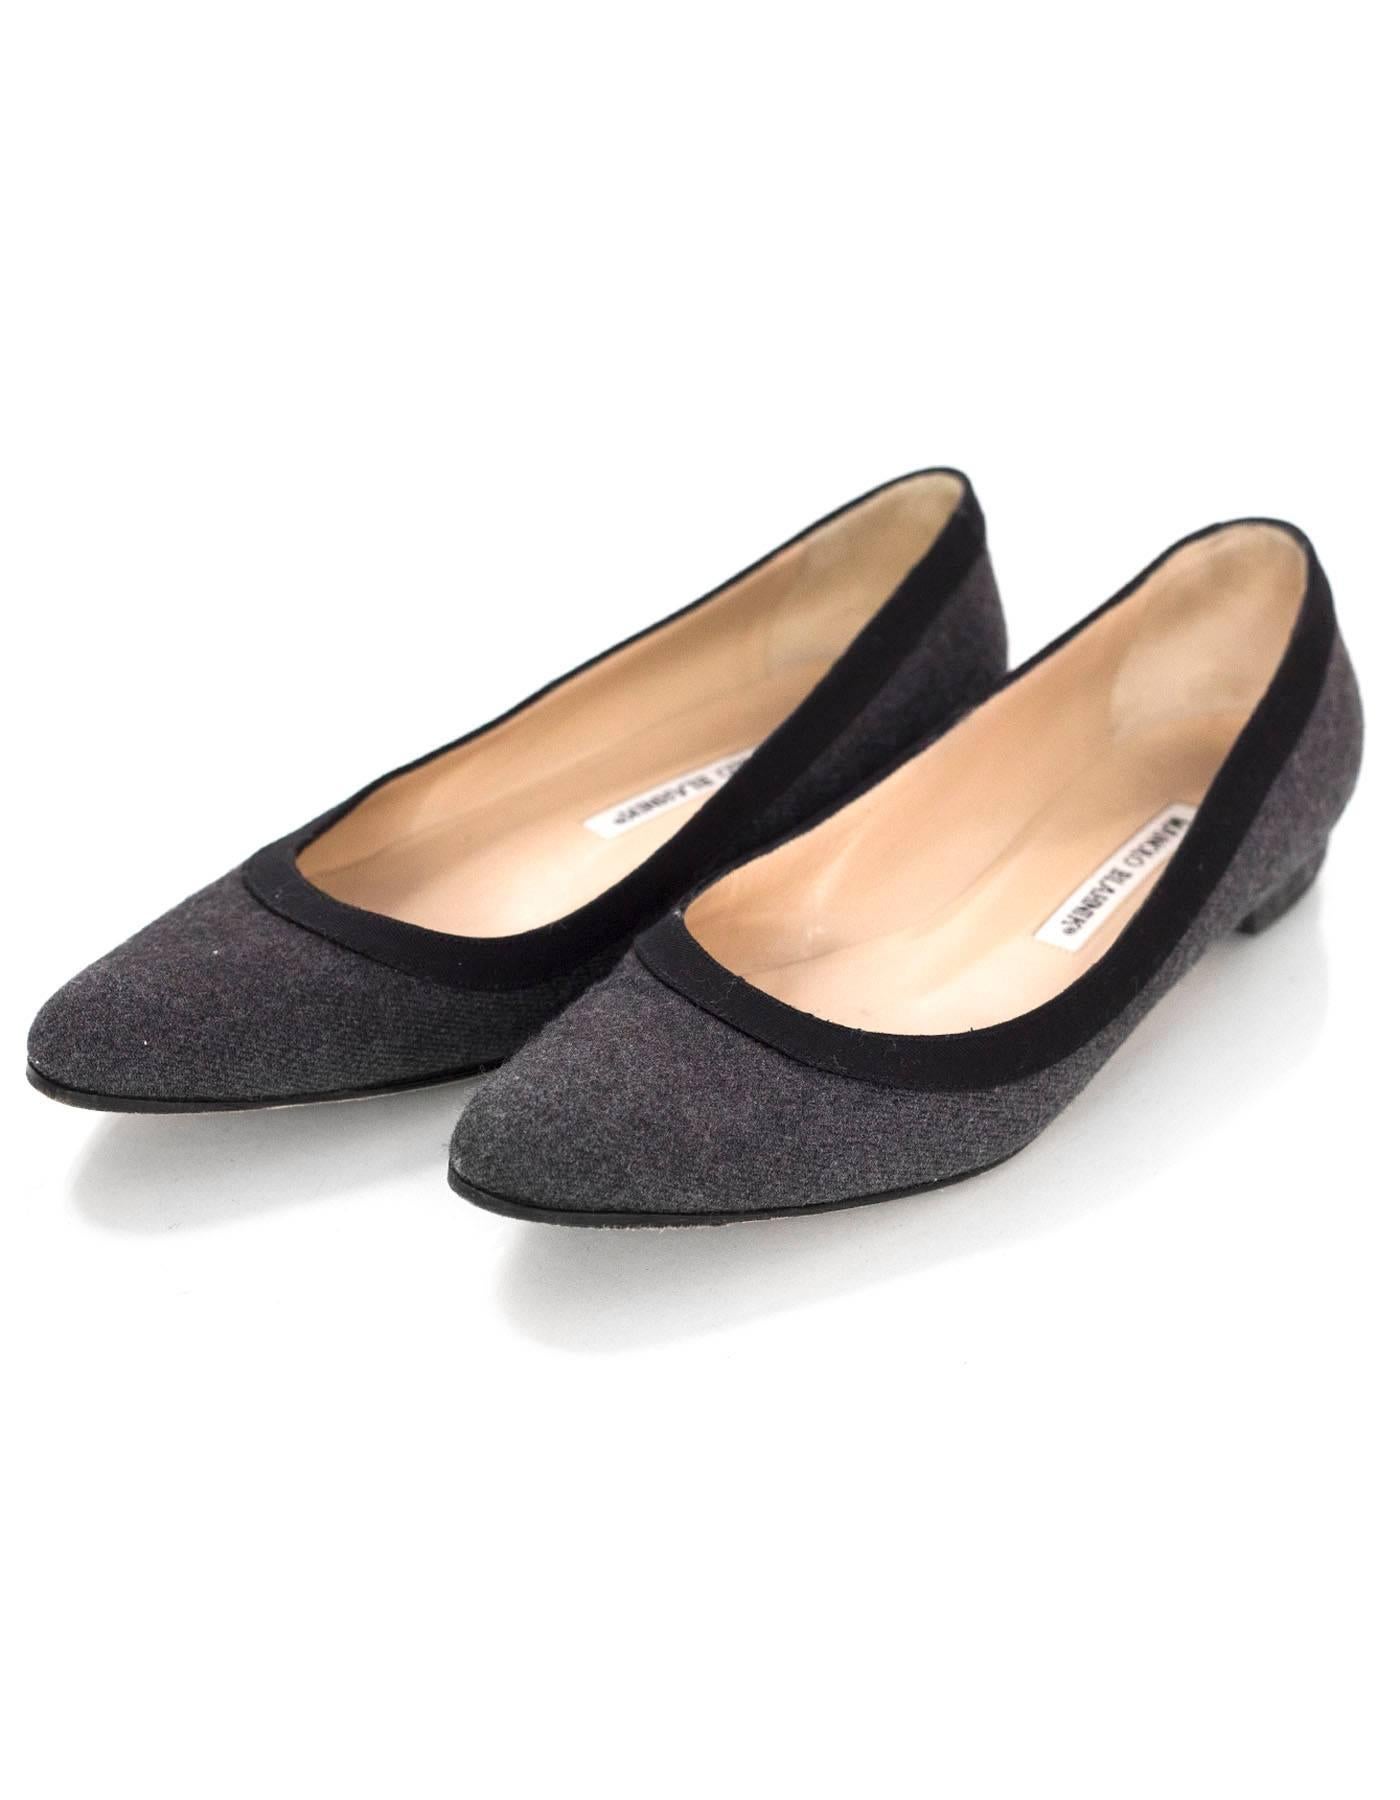 Manolo Blahnik Grey Wool Flats Sz 37

Made In: Italy
Color: Grey
Materials: Wool
Closure/Opening: Slide on
Sole Stamp: Manolo Blahnik 
Overall Condition: Excellent pre-owned condition with the exception of being re-soled
Included: Manolo Blahnik